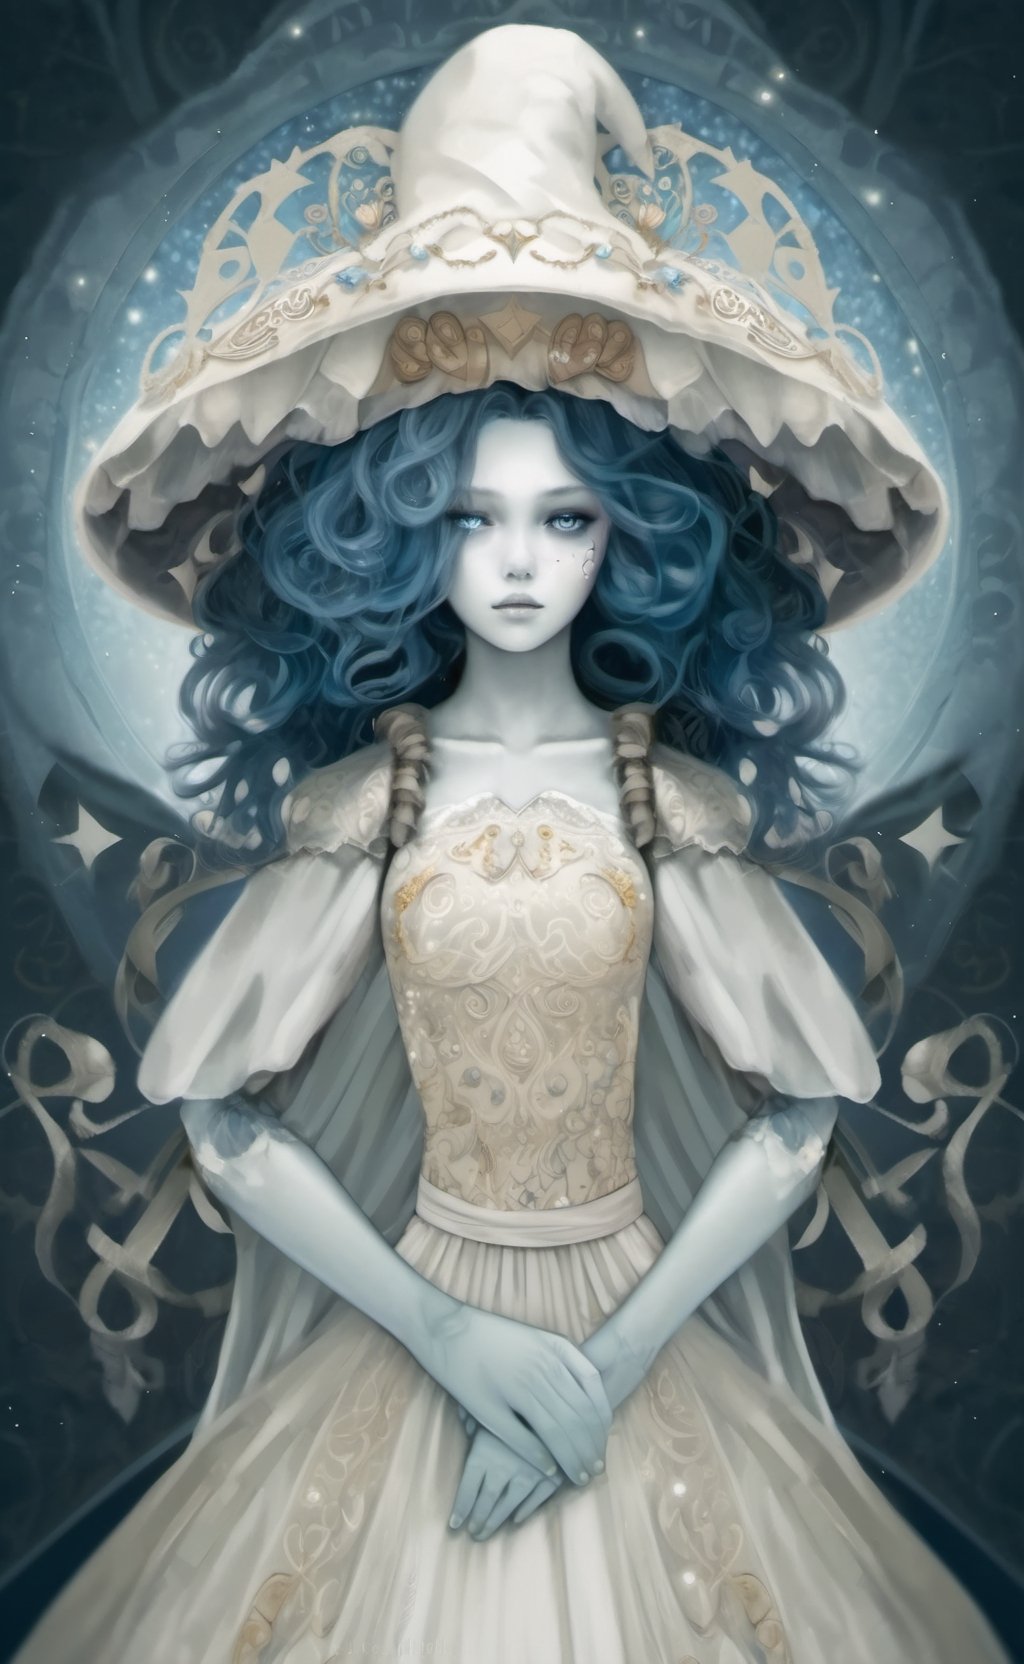 IncrsXLRanni, Fantasy, surreal abstract,, 1girl,  blue skin, corly hair, white dress is made of a soft and silky fabric, flows on the body, grey&white color, sweetheart neckline, a flared skirt reaches the floor, adorned skirt by intricate embellishments of floral patterns, stars, and crescent moons, doll joints,  Made of beads, sequins, crystals, and pearls that sparkling, has a veil and hat which also has floral, star, and moon motifs that complement the dress. Accesorized dress, Combination of fashionable and fantasy, creative, Hyperdetailed artwork,IncrsXLRanni,wavy hair, blue skin, cracked skin, extra arms